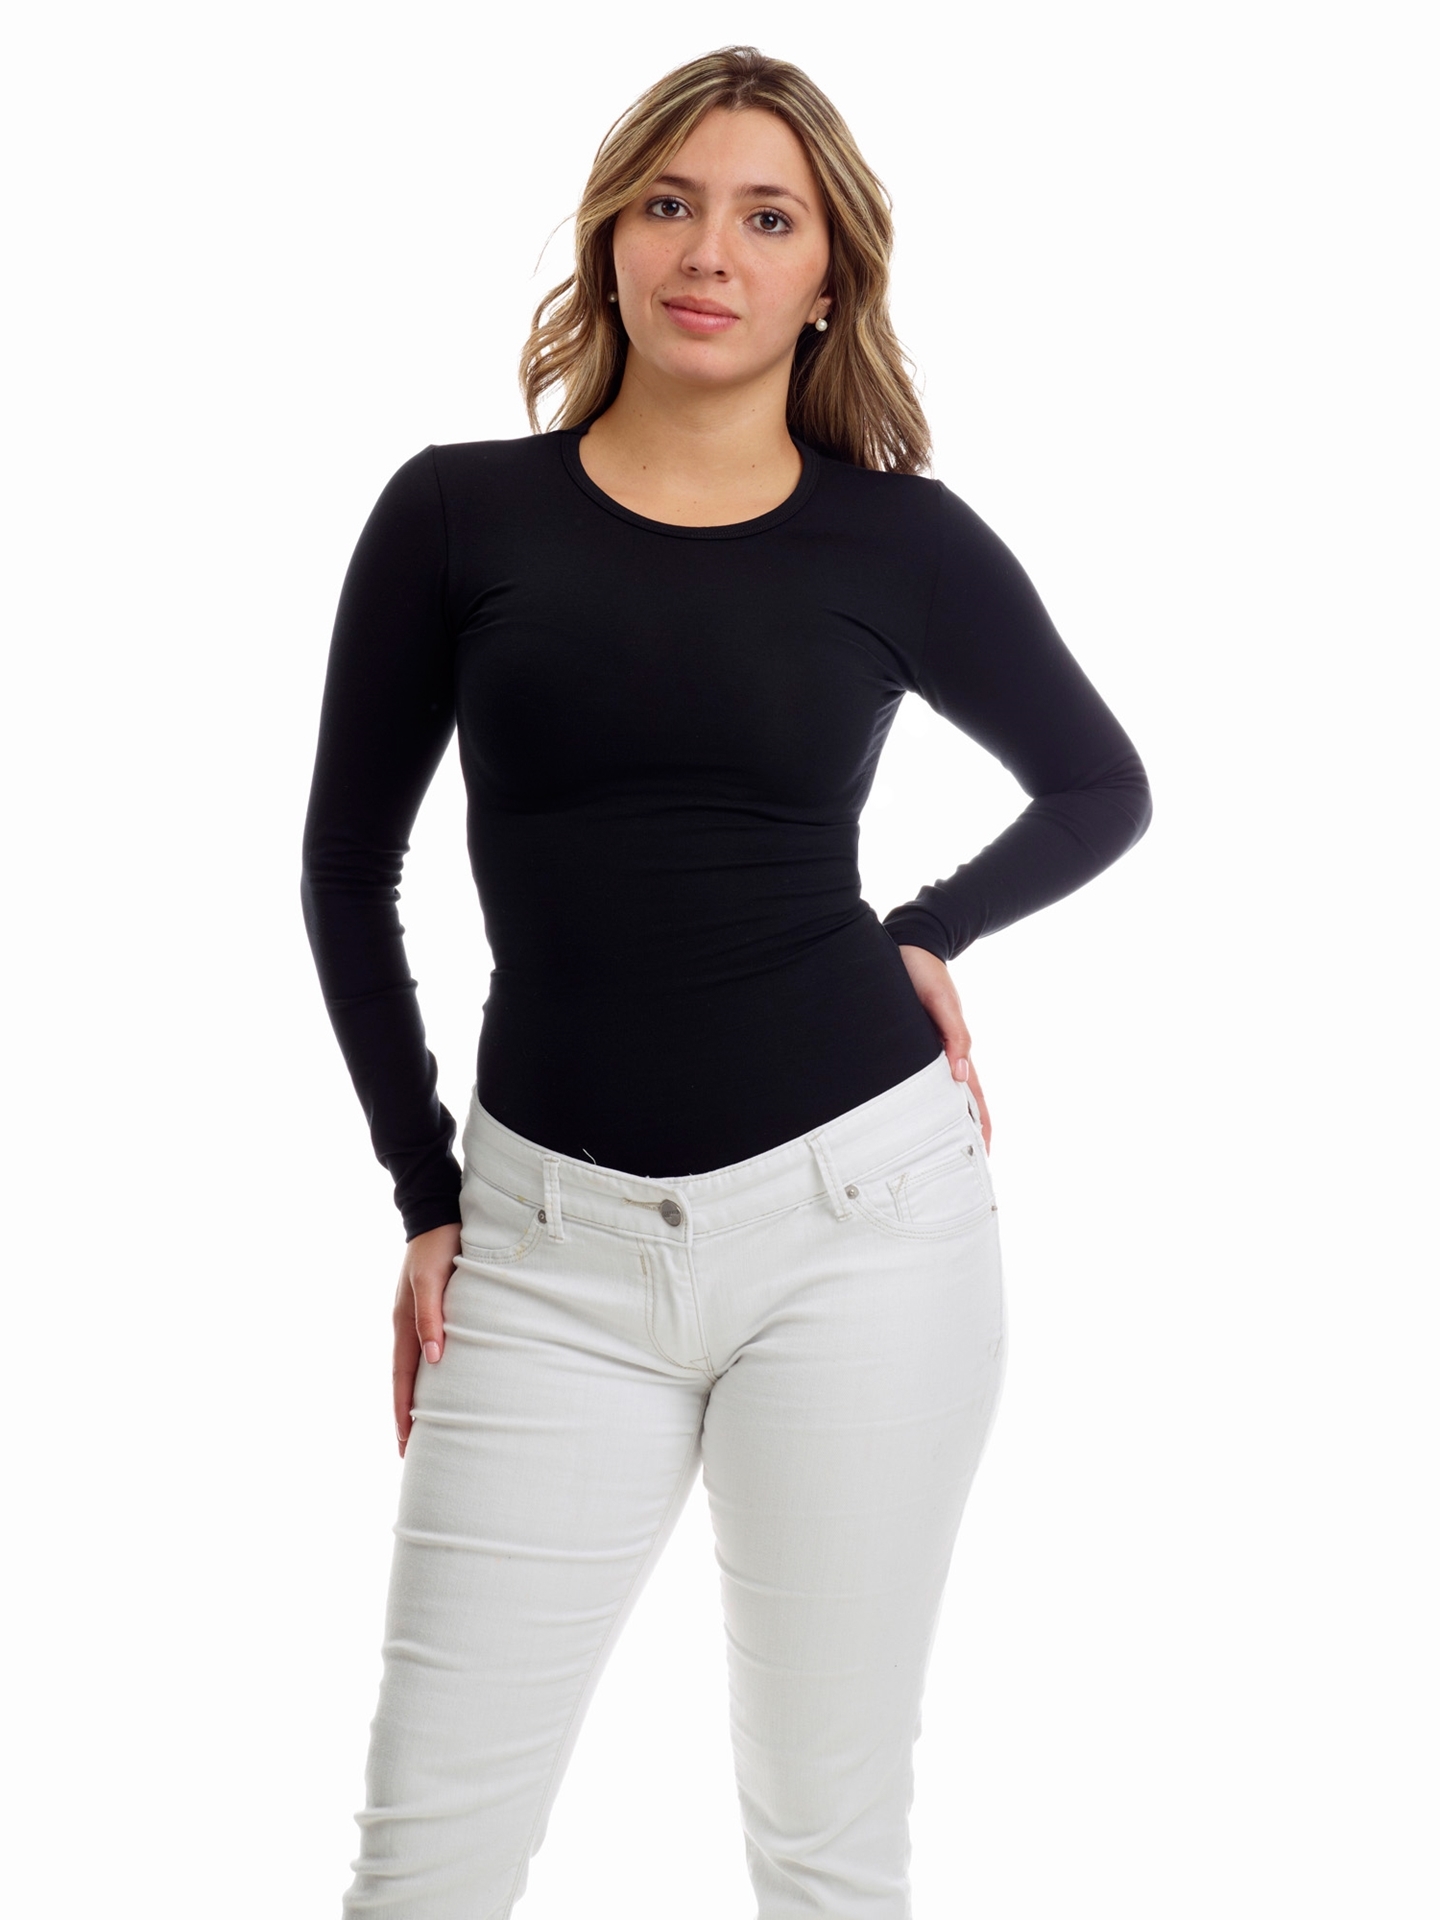 https://www.underworks.com/images/thumbs/0001991_womens-ultra-light-cotton-spandex-compression-crew-neck-top-long-sleeves.jpeg